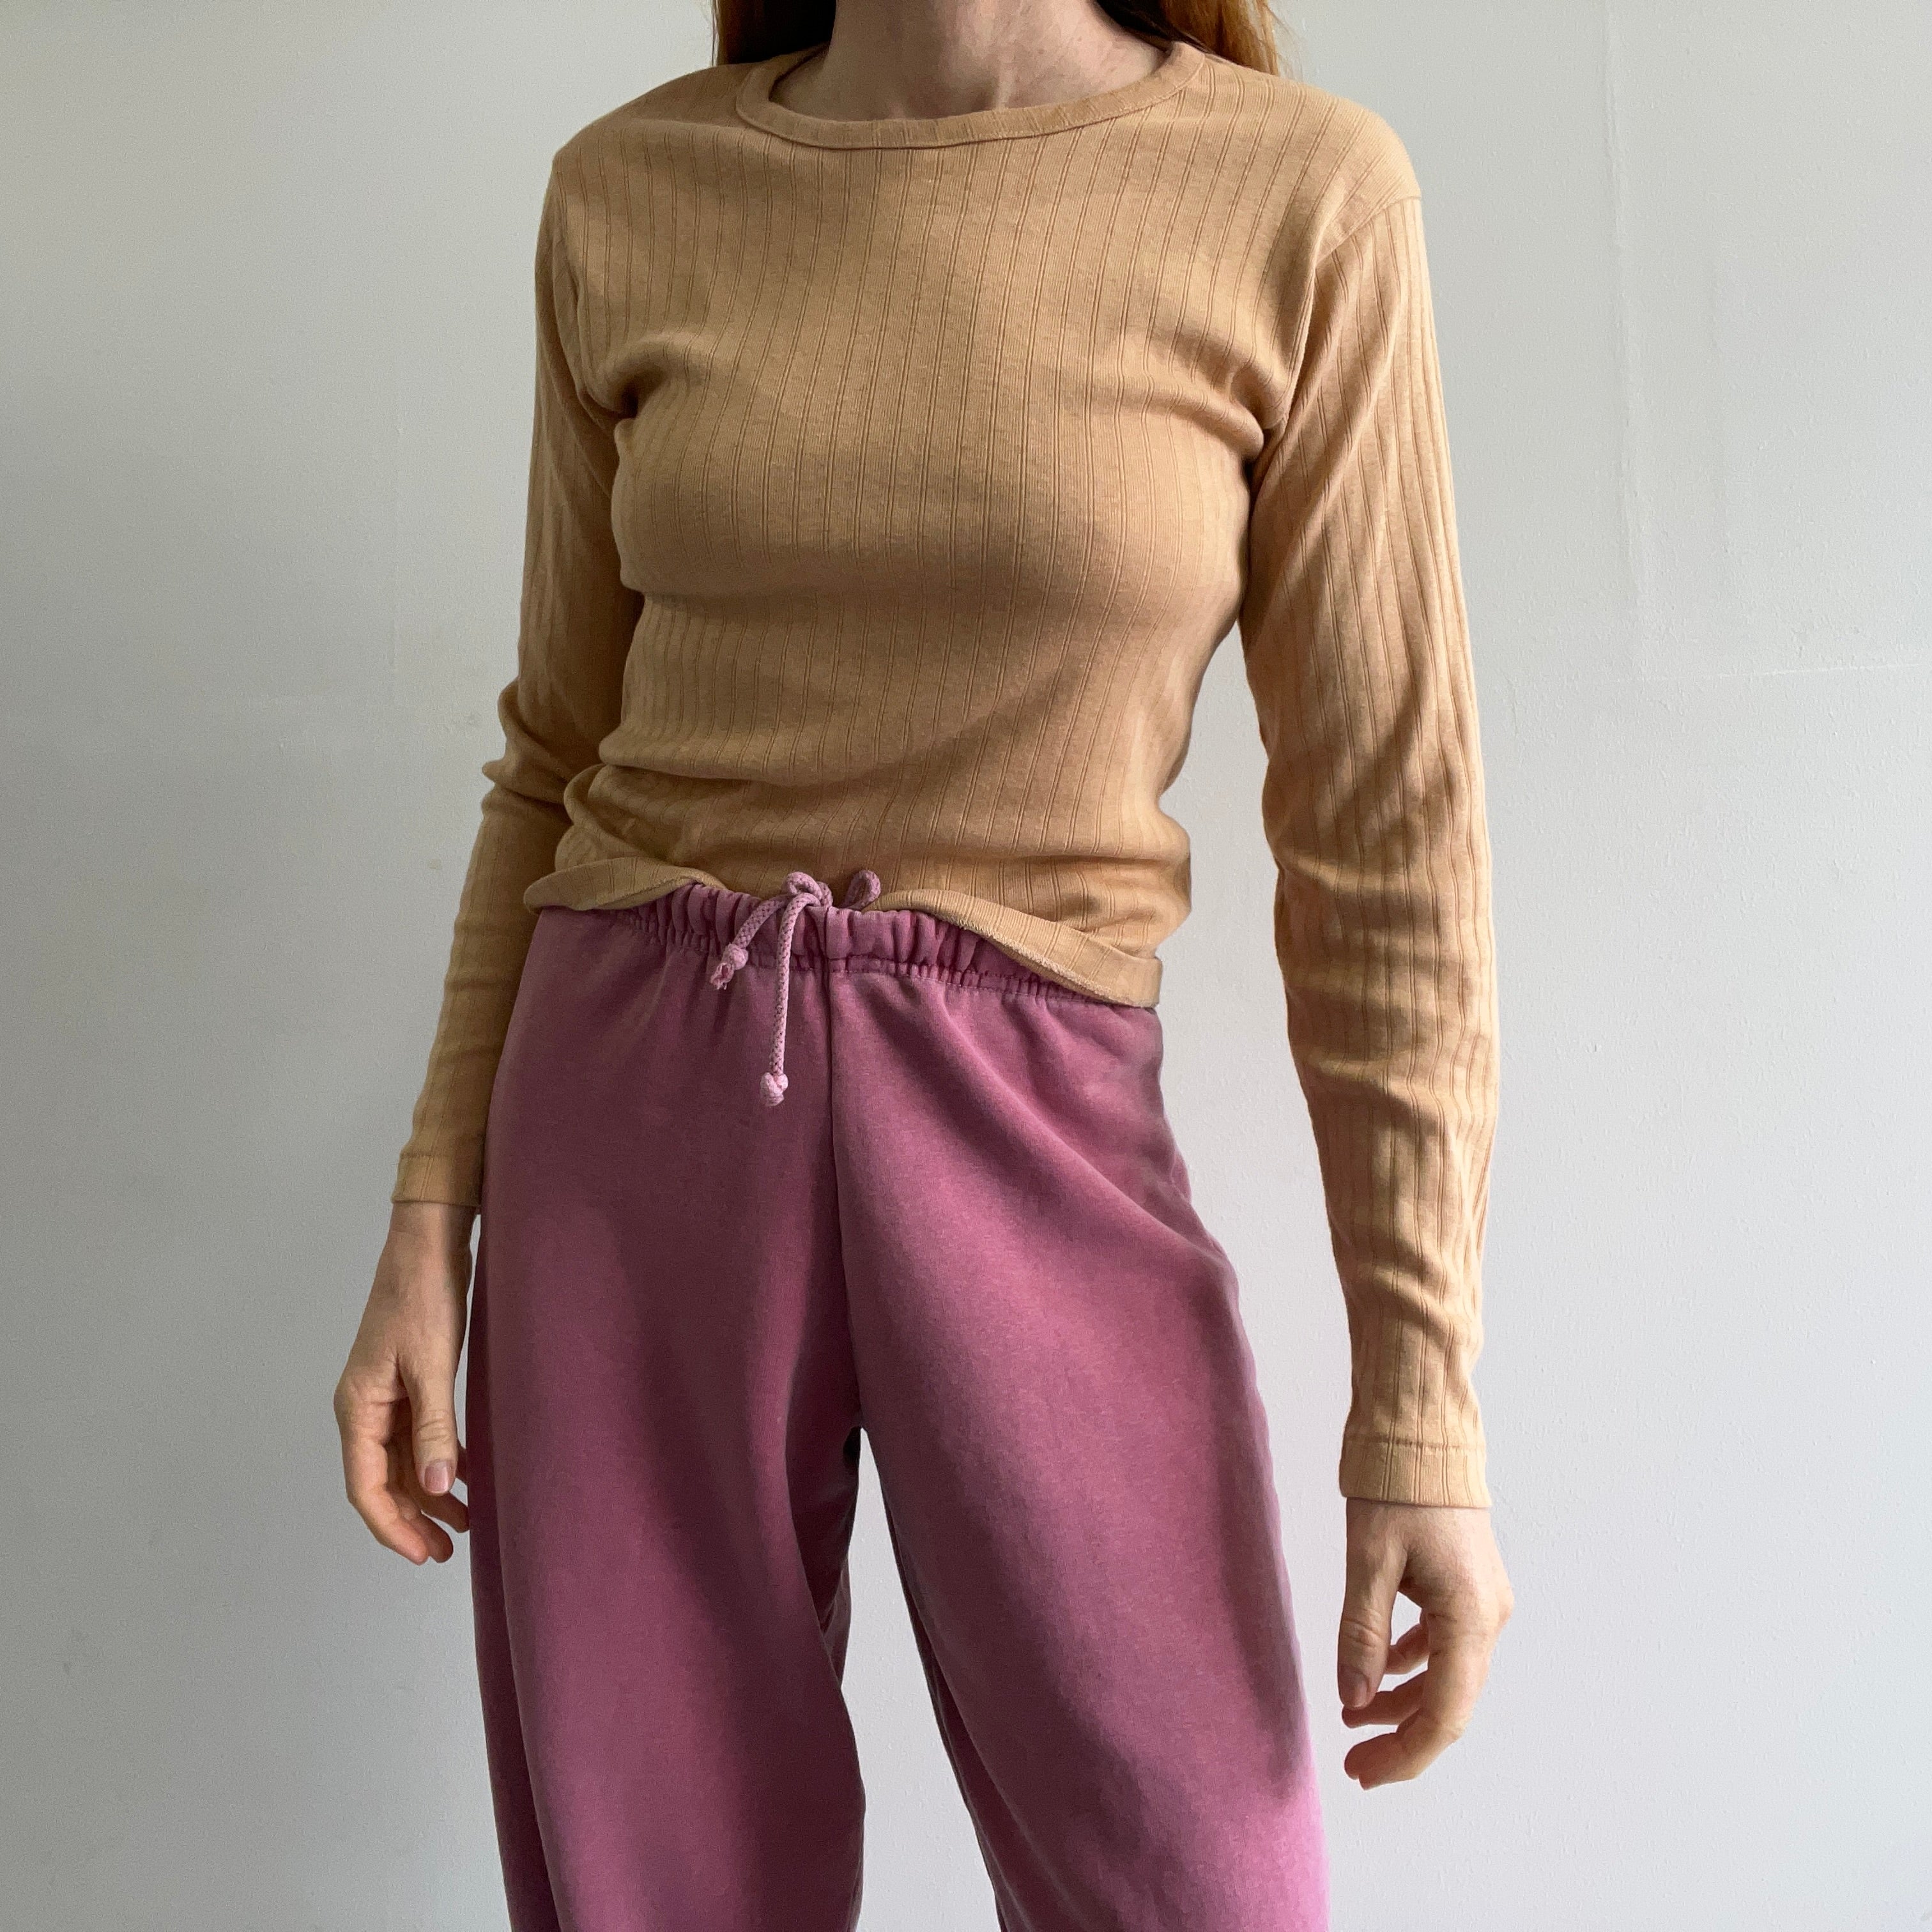 1970s Super Soft Ribbed Camel Colored Long Sleeve T-Shirt - WOW